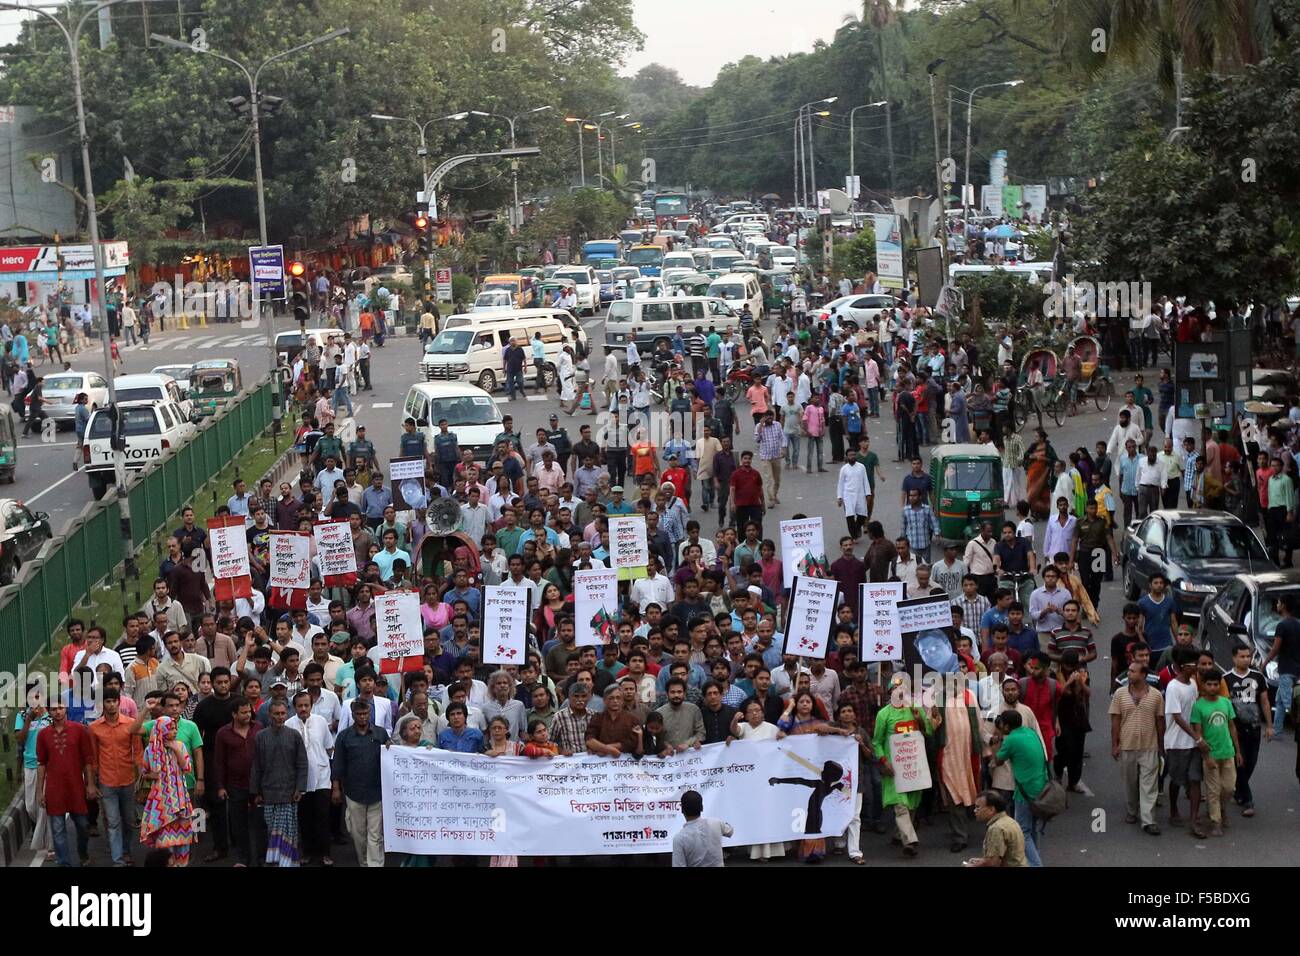 Dhaka, Bangladesh. 1st November, 2015. Leaders and activists of Gonojagoron Mancha hold a procession at Shahbagh in Dhaka on November 1, 2015.  Gonojagoron Mancha has called a countrywide six-hour hartal from 6:00am on Tuesday to protest killing of publisher Faisal Arefin Dipan and attack on three others. “The hartal will be called off if law enforcers can arrest the perpetrators within the next 24 hours,” Gonojagoron Mancha spokesperson Imran H Sarker said. Stock Photo